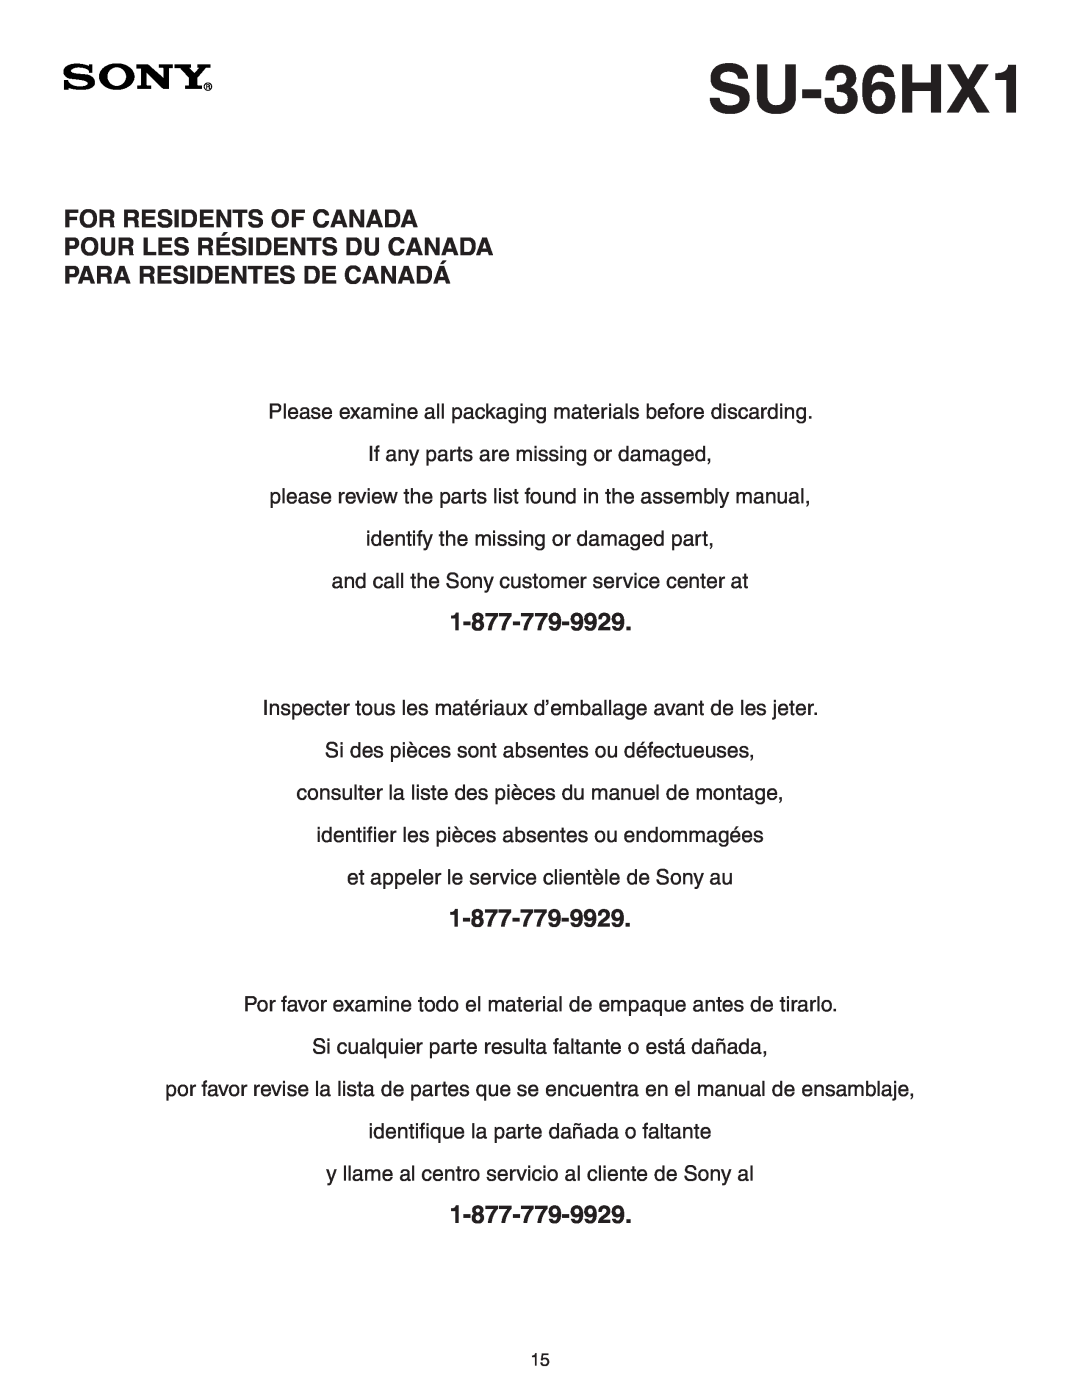 Sony SU-36HX1 manual For Residents Of Canada, Pour Les Résidents Du Canada, Para Residentes De Canadá 